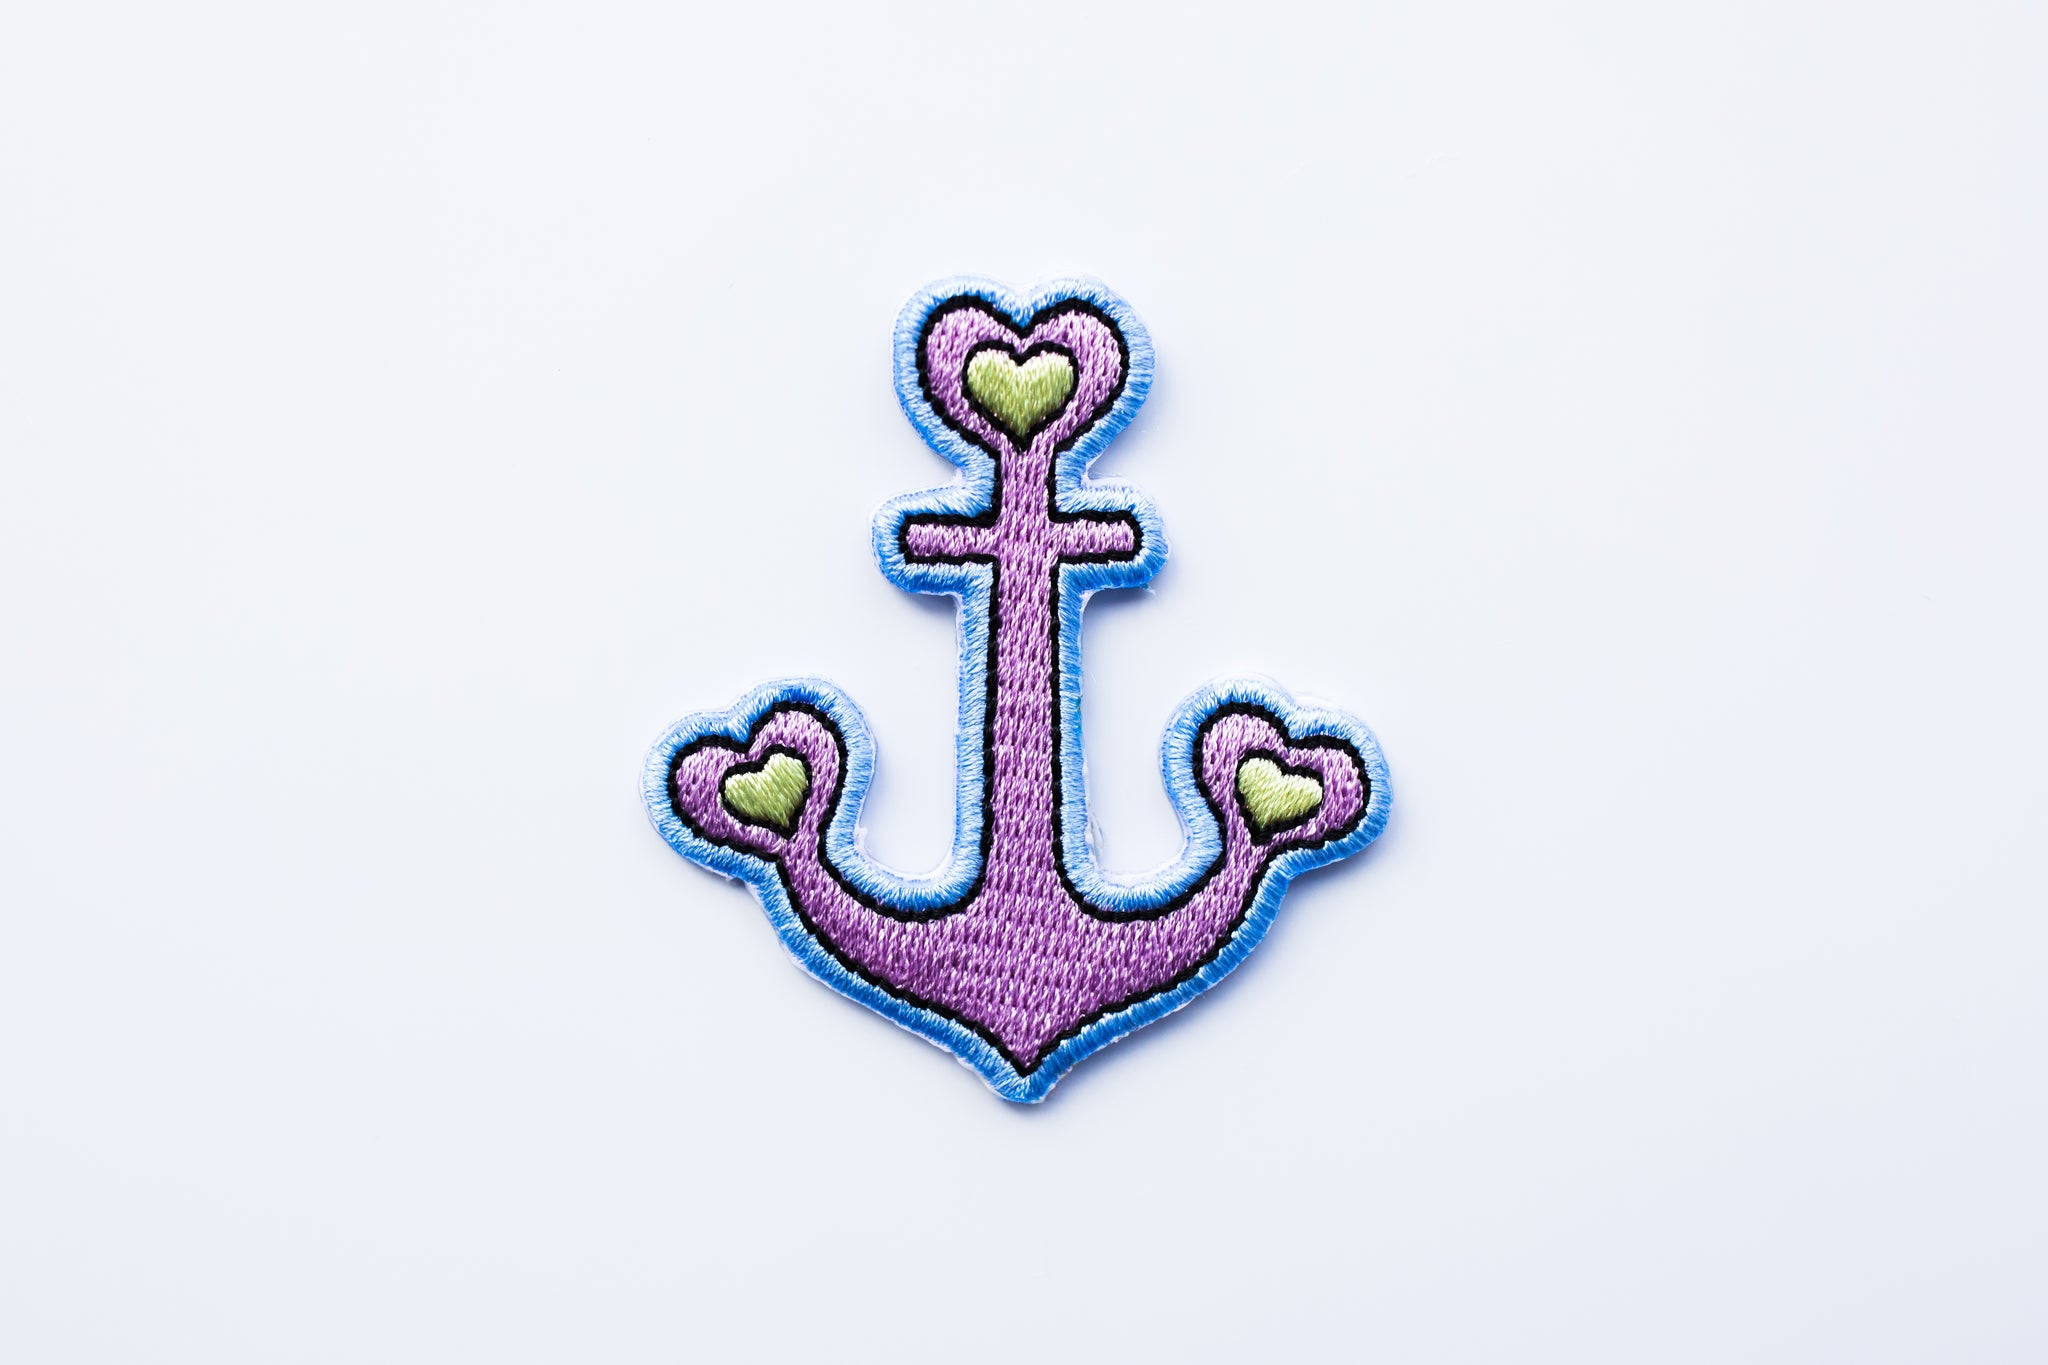 Patch Anchor